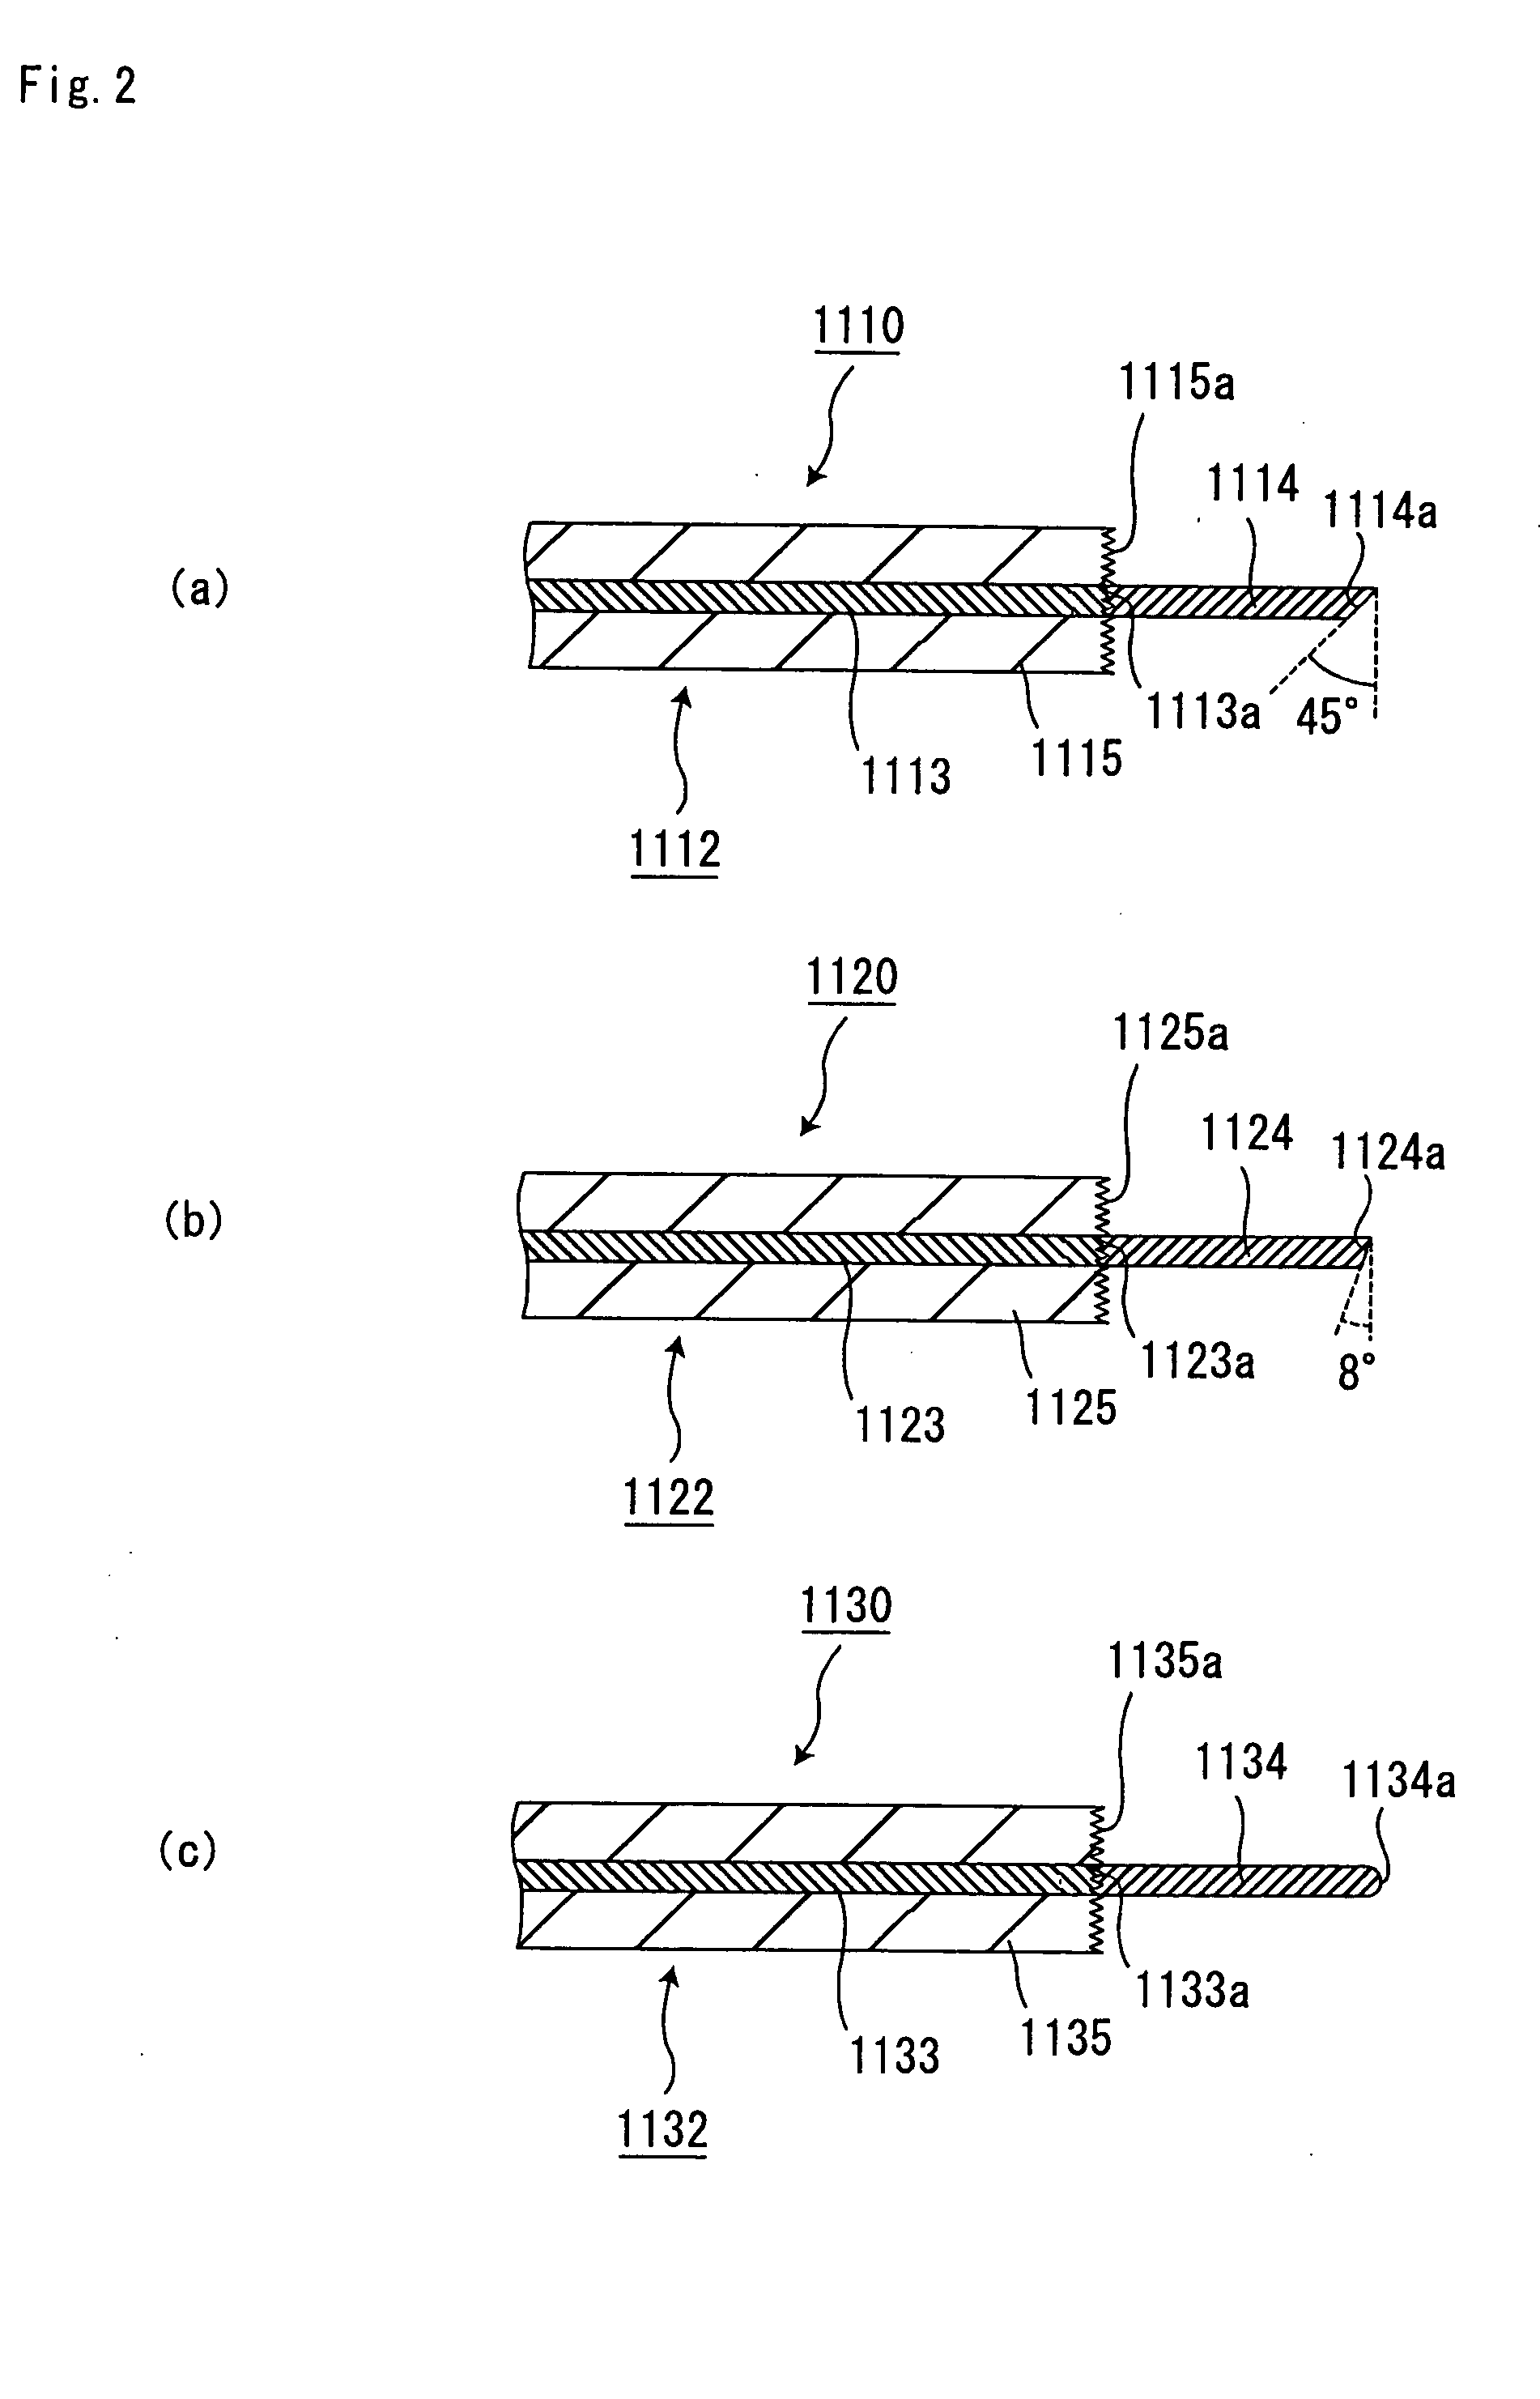 Optical transmission structural body, optical waveguide, optical waveguide formation method, and optical wiring connection body